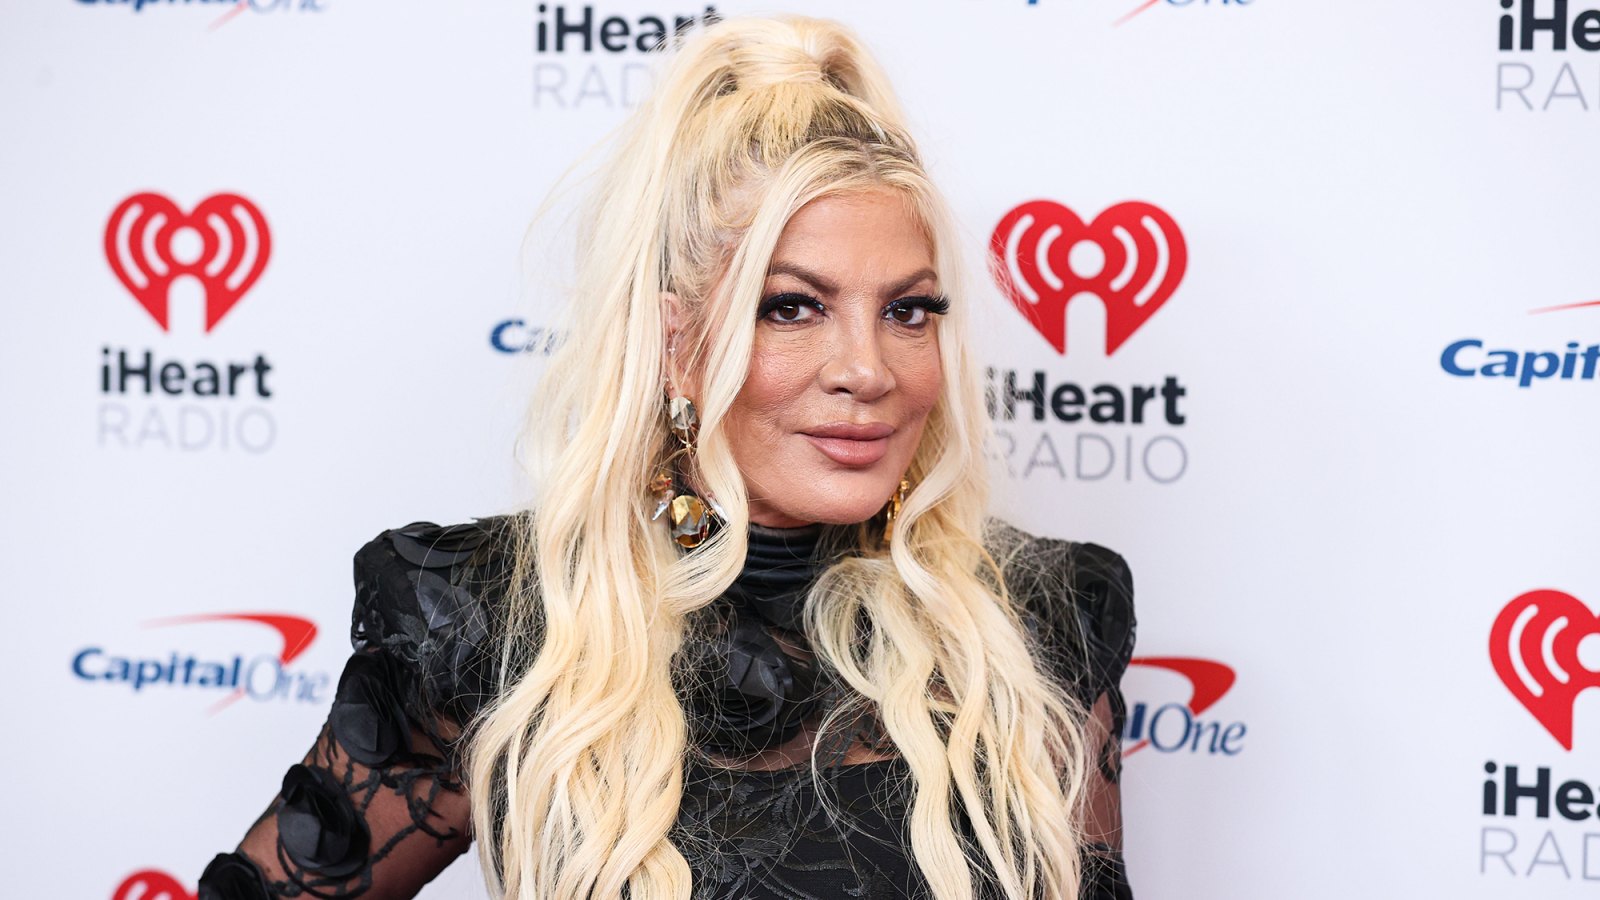 Tori Spelling Reveals House Mold Infection Was ‘Slowly Killing’ Her Family for 3 Years: 'My Kids Are So Sick' 